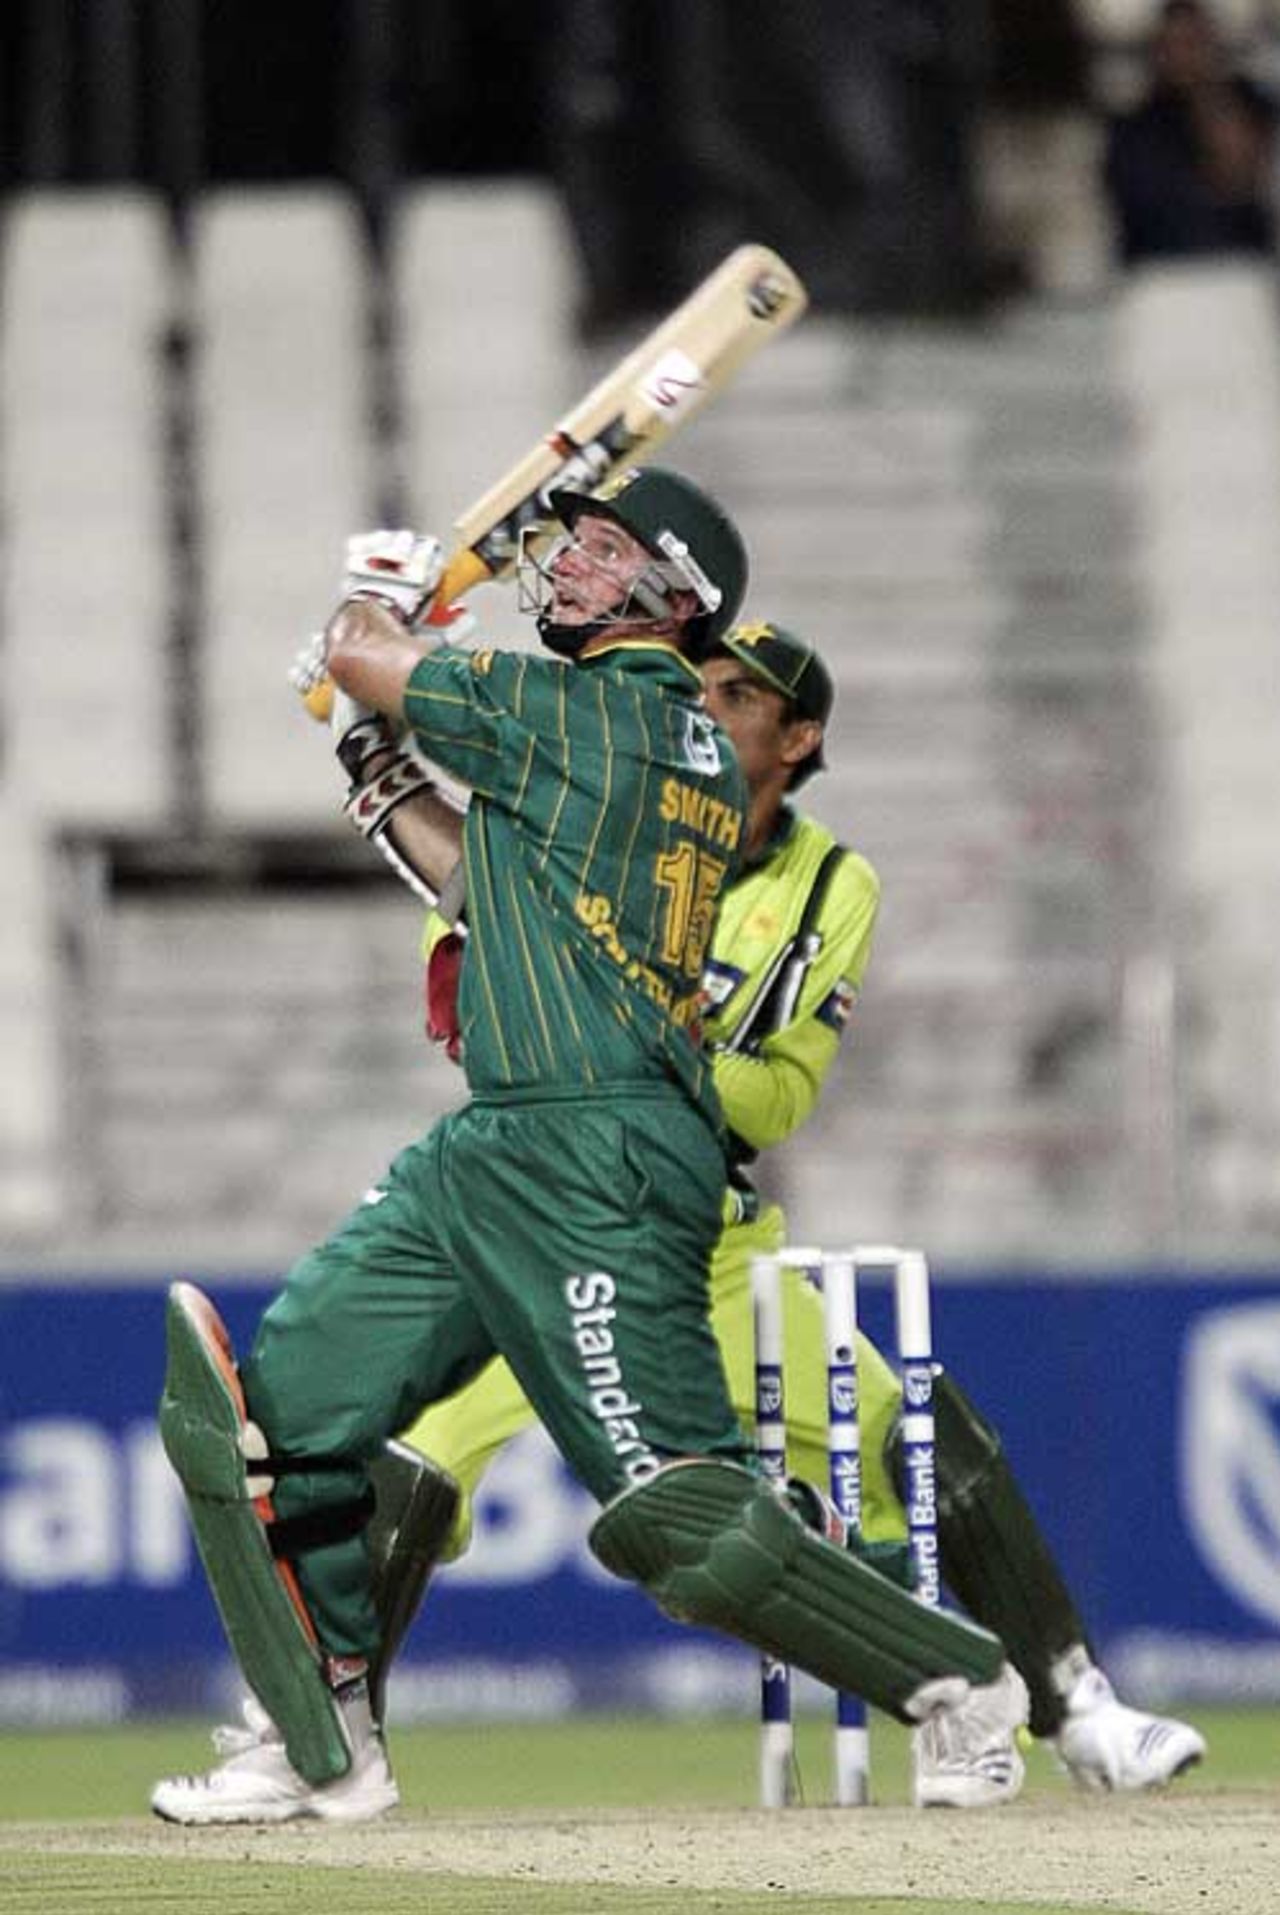 Graeme Smith launches one of his four sixes, South Africa v Pakistan, Twenty20, Johannesburg, February 2, 2007